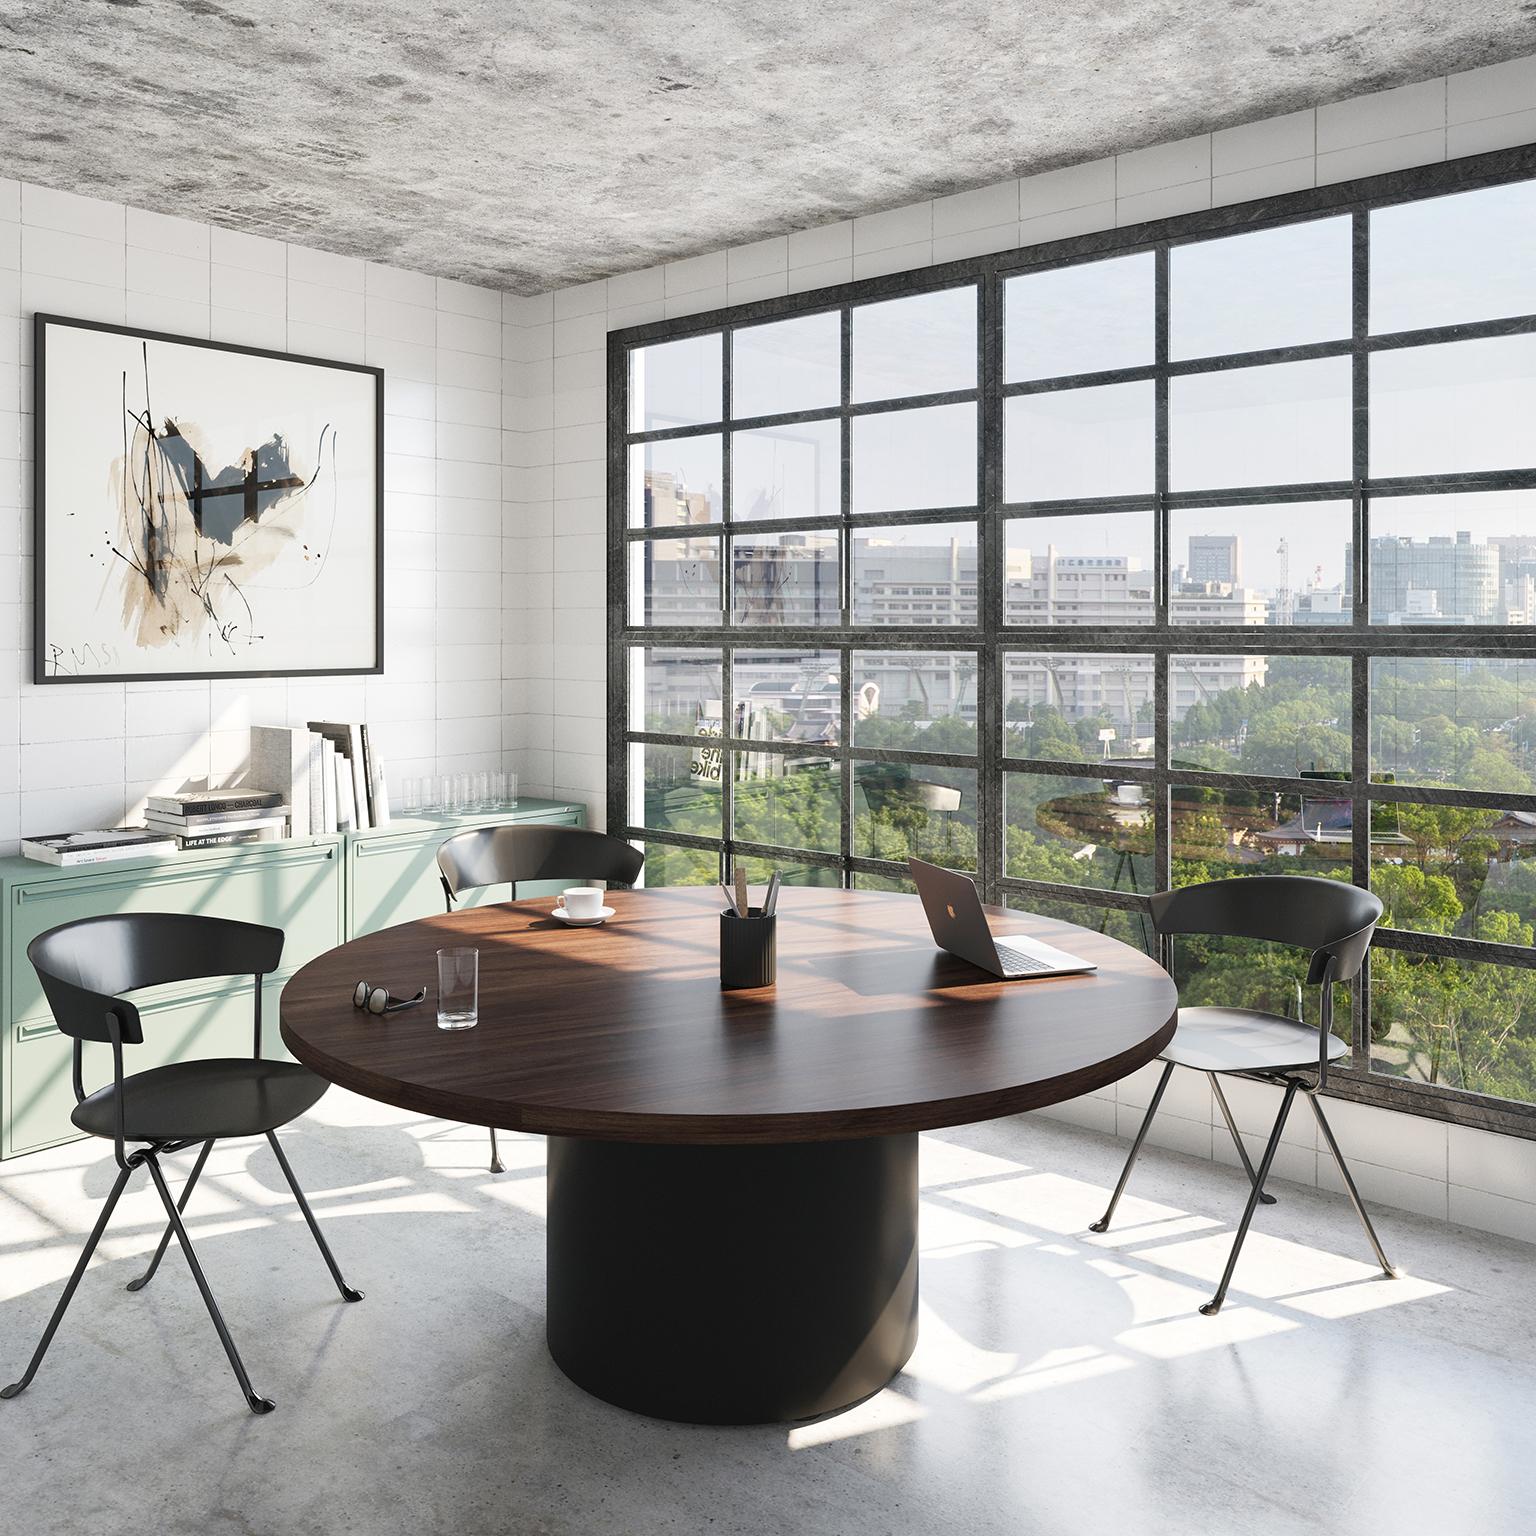 The Column table is a modern round meeting table that proves there's beauty in simplicity.

Its clean geometric lines happen to be highly functional, providing more legroom (and seats) around the pedestal base and allowing the table to fit into